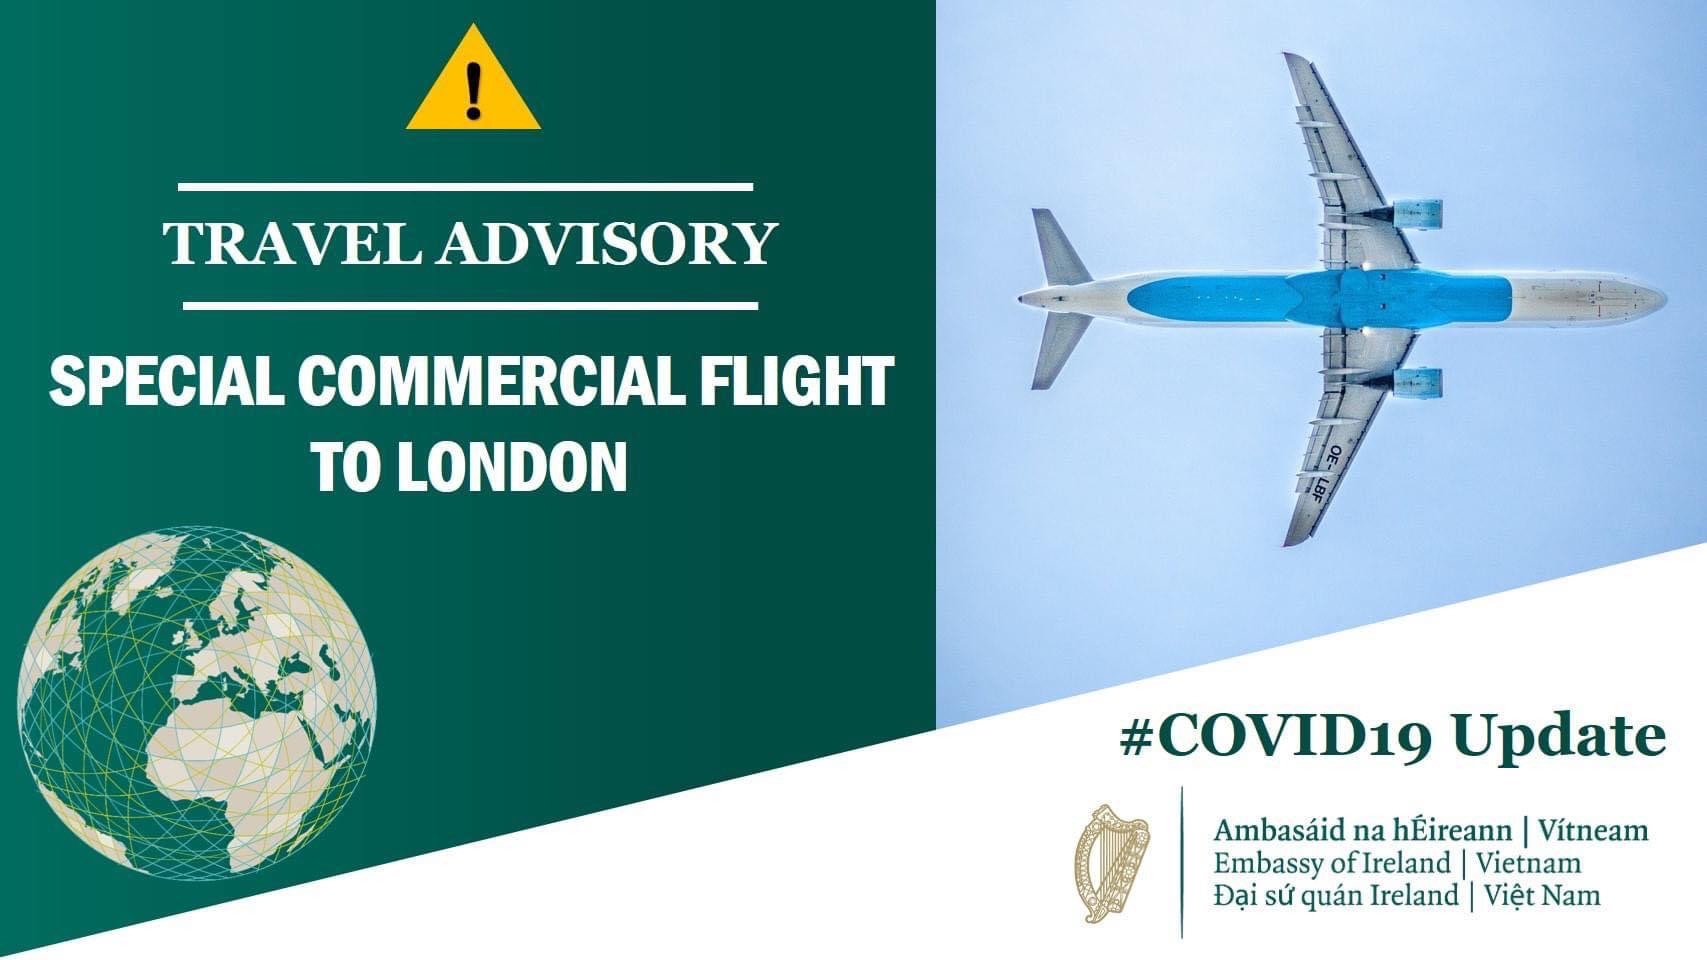 Special Commerical Flight to London